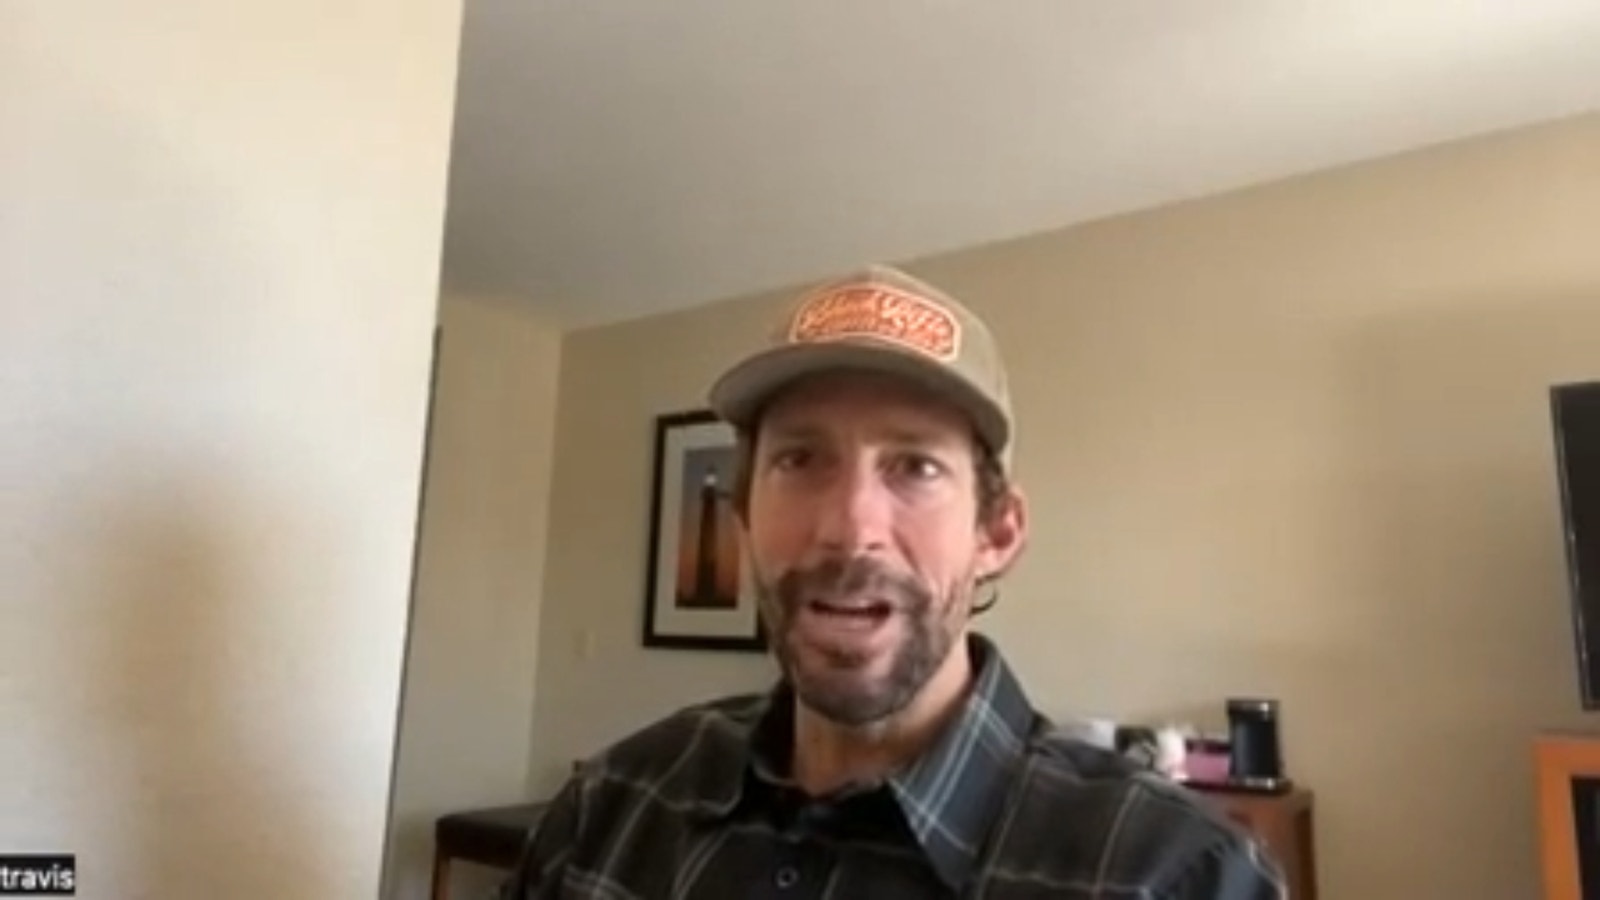 Travis Pastrana on his Daytona 500 bid and the excitement of his fans